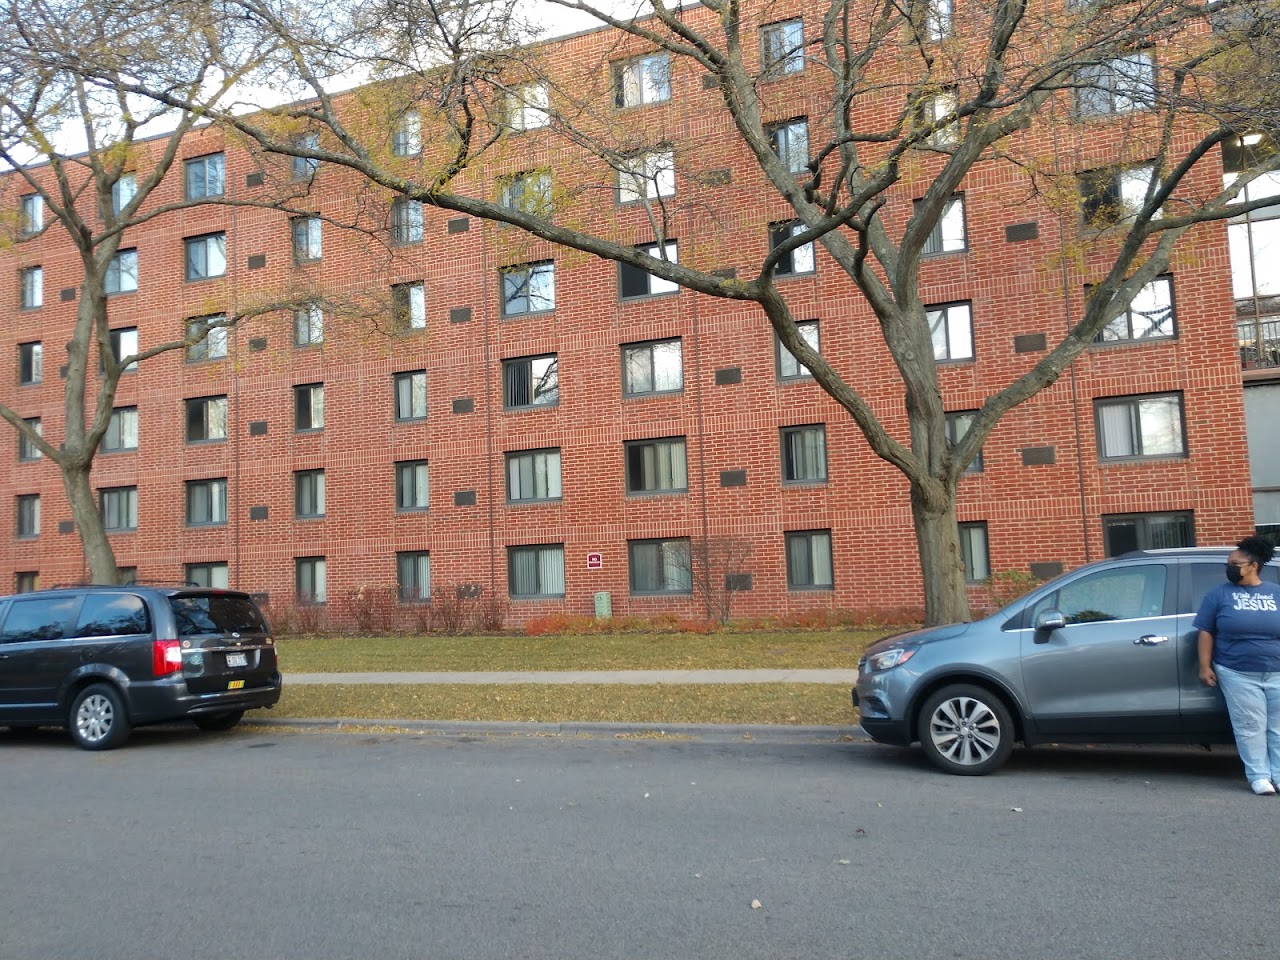 Photo of CARMEL HOUSE APTS. Affordable housing located at 2815 ELISHA AVE ZION, IL 60099